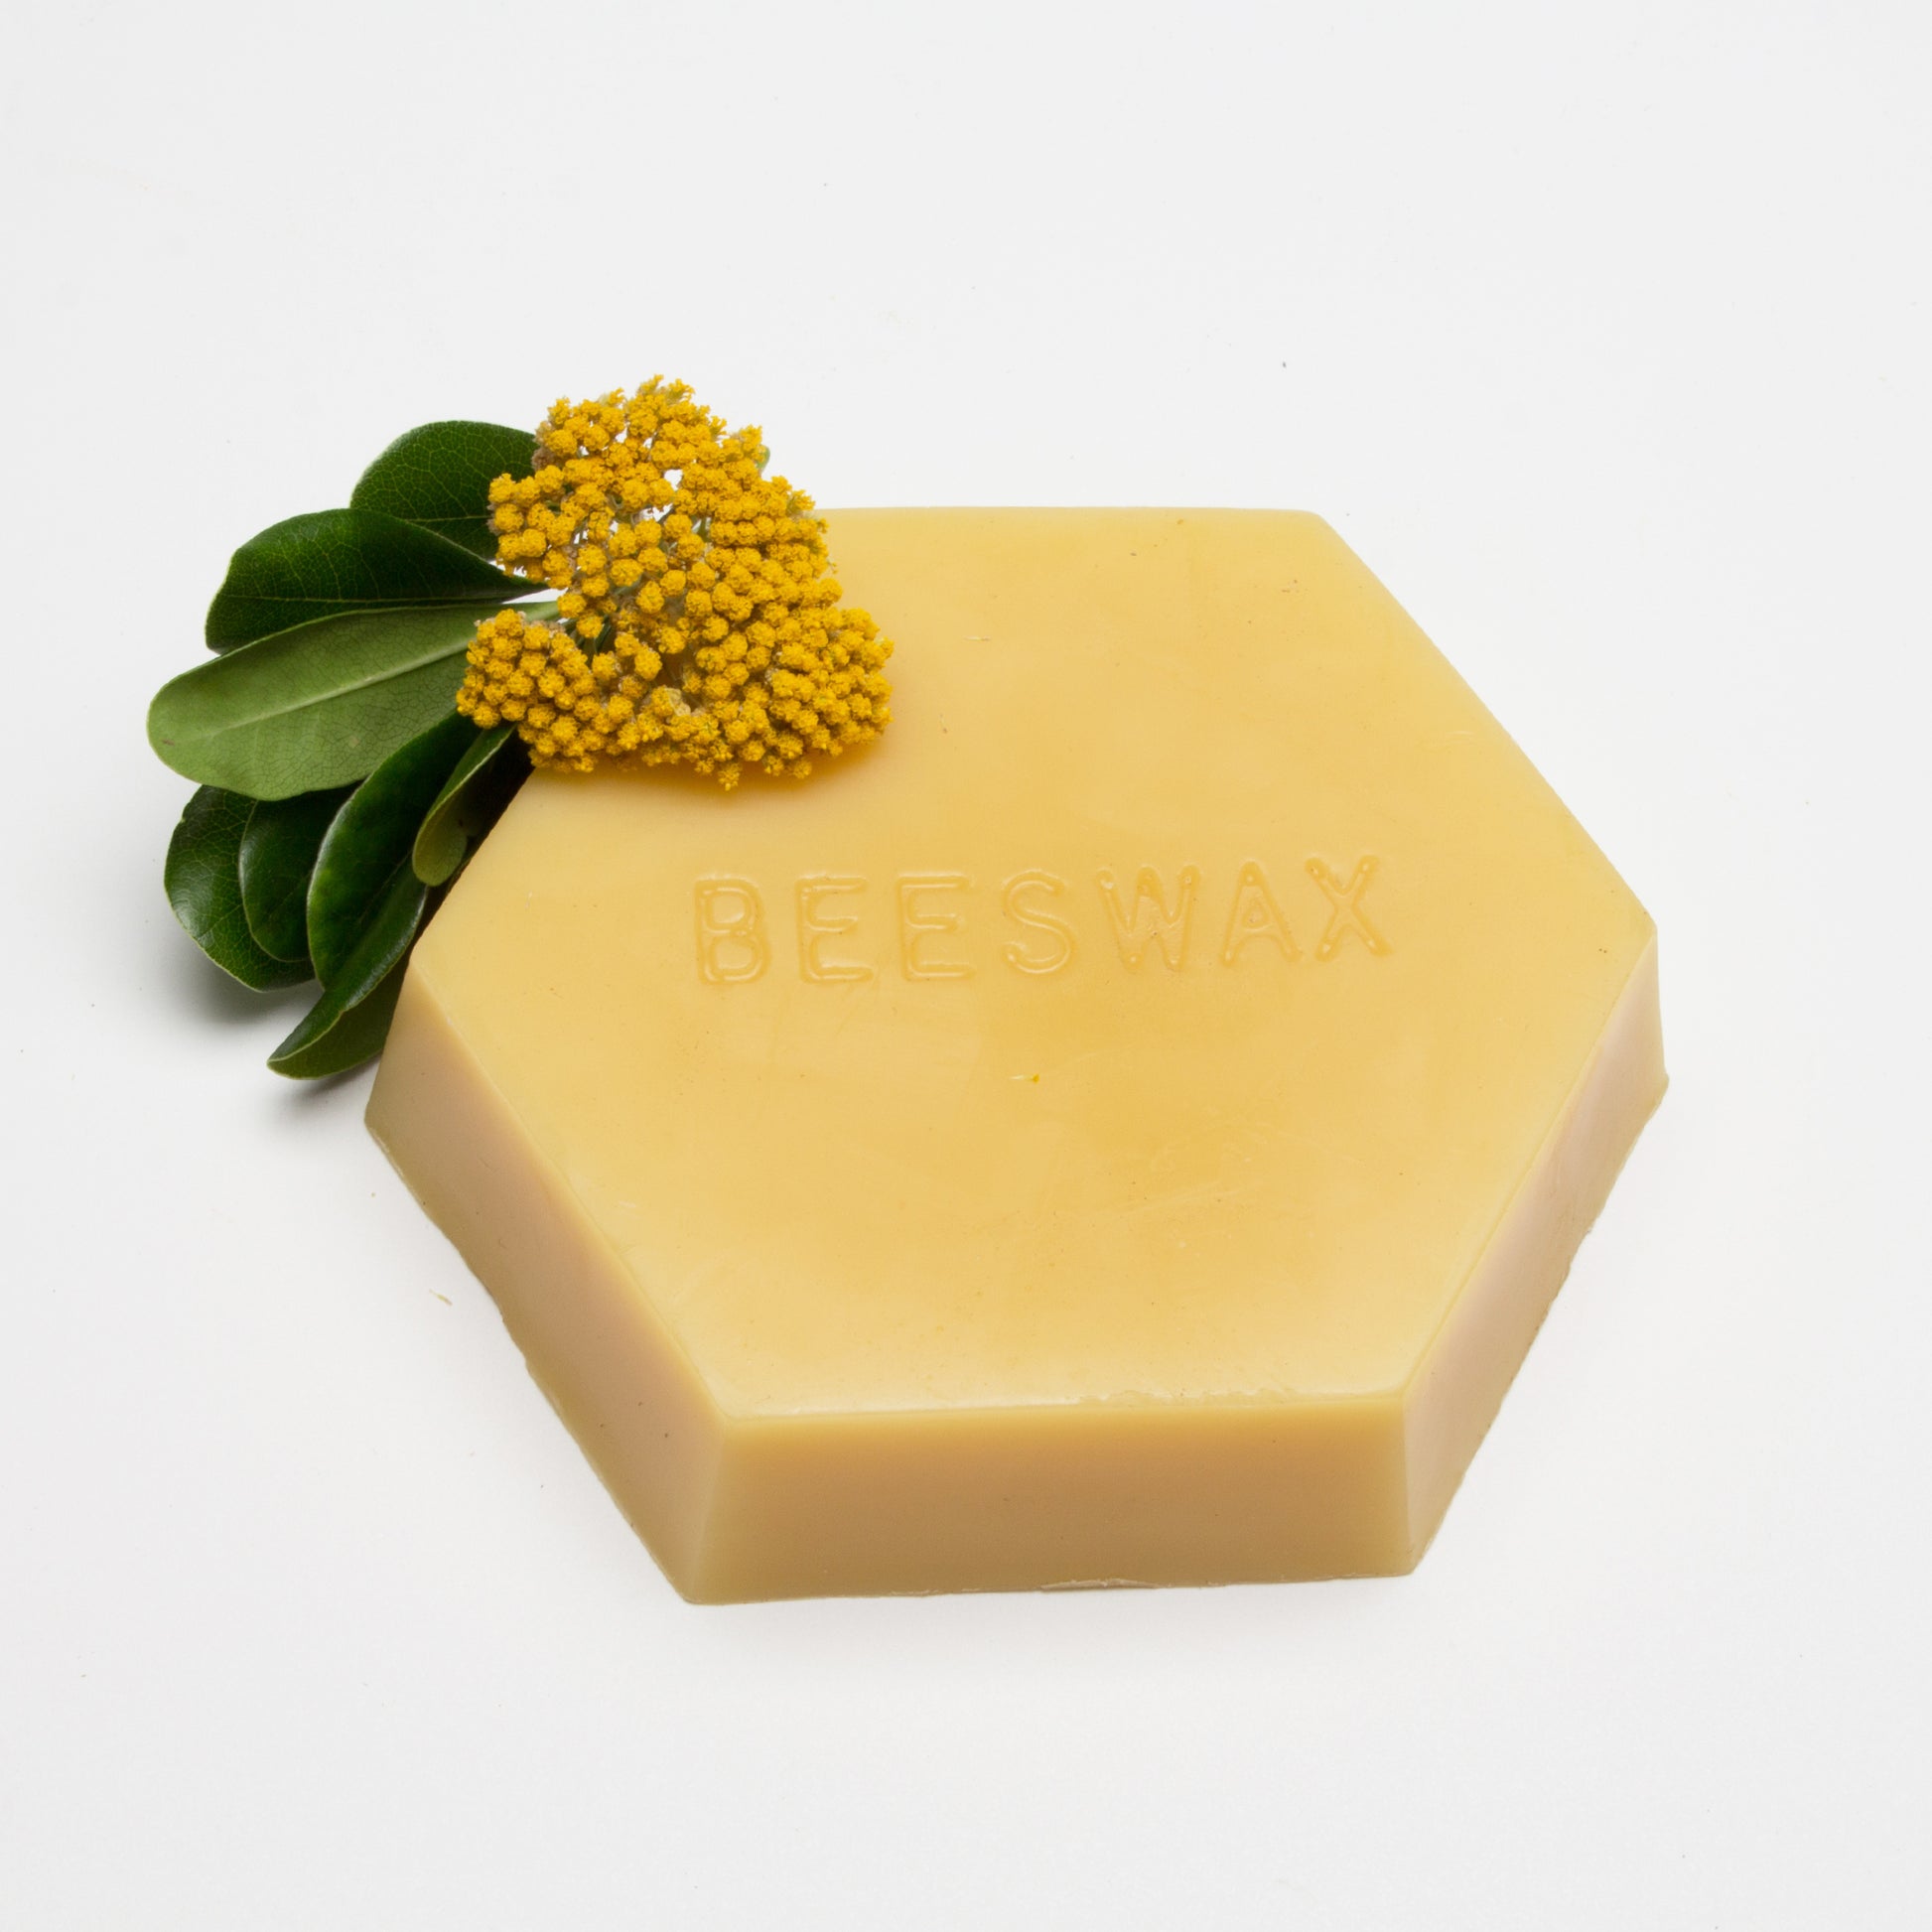 Lowest Price Pure Bulk Beeswax For Foundation Wax, High Quality